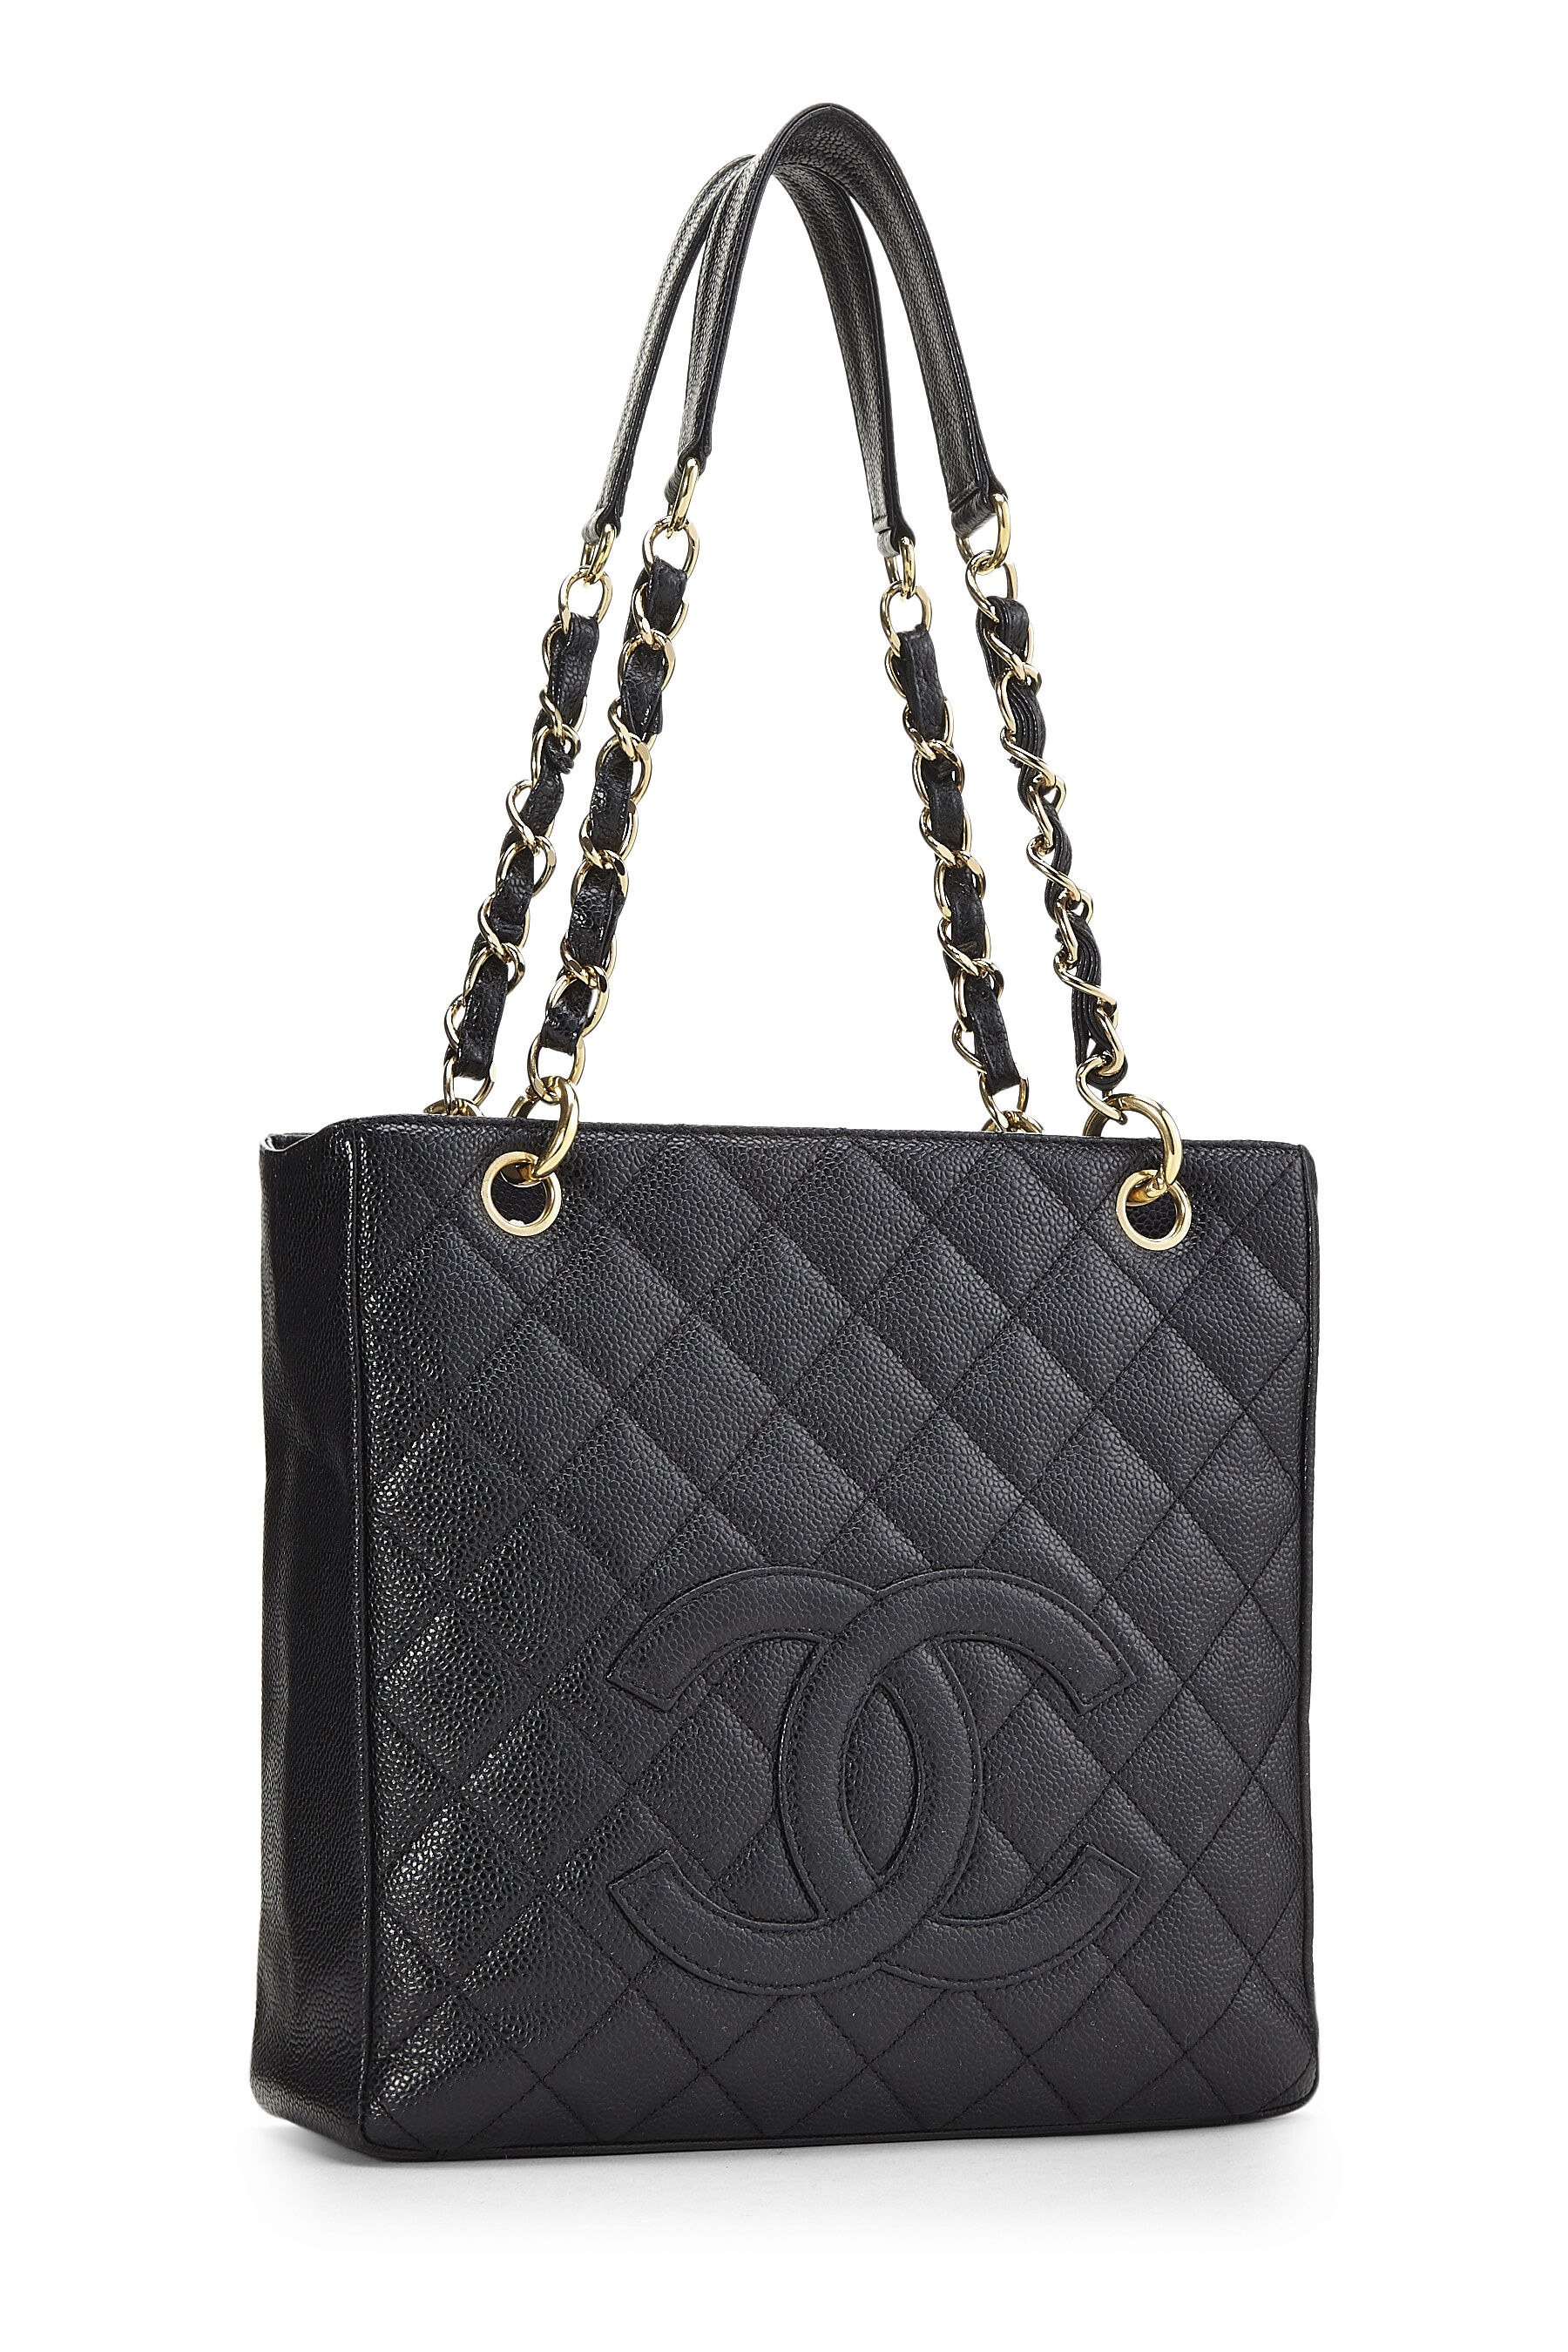 Chanel Petite Shopping Tote Tote Bags for Women